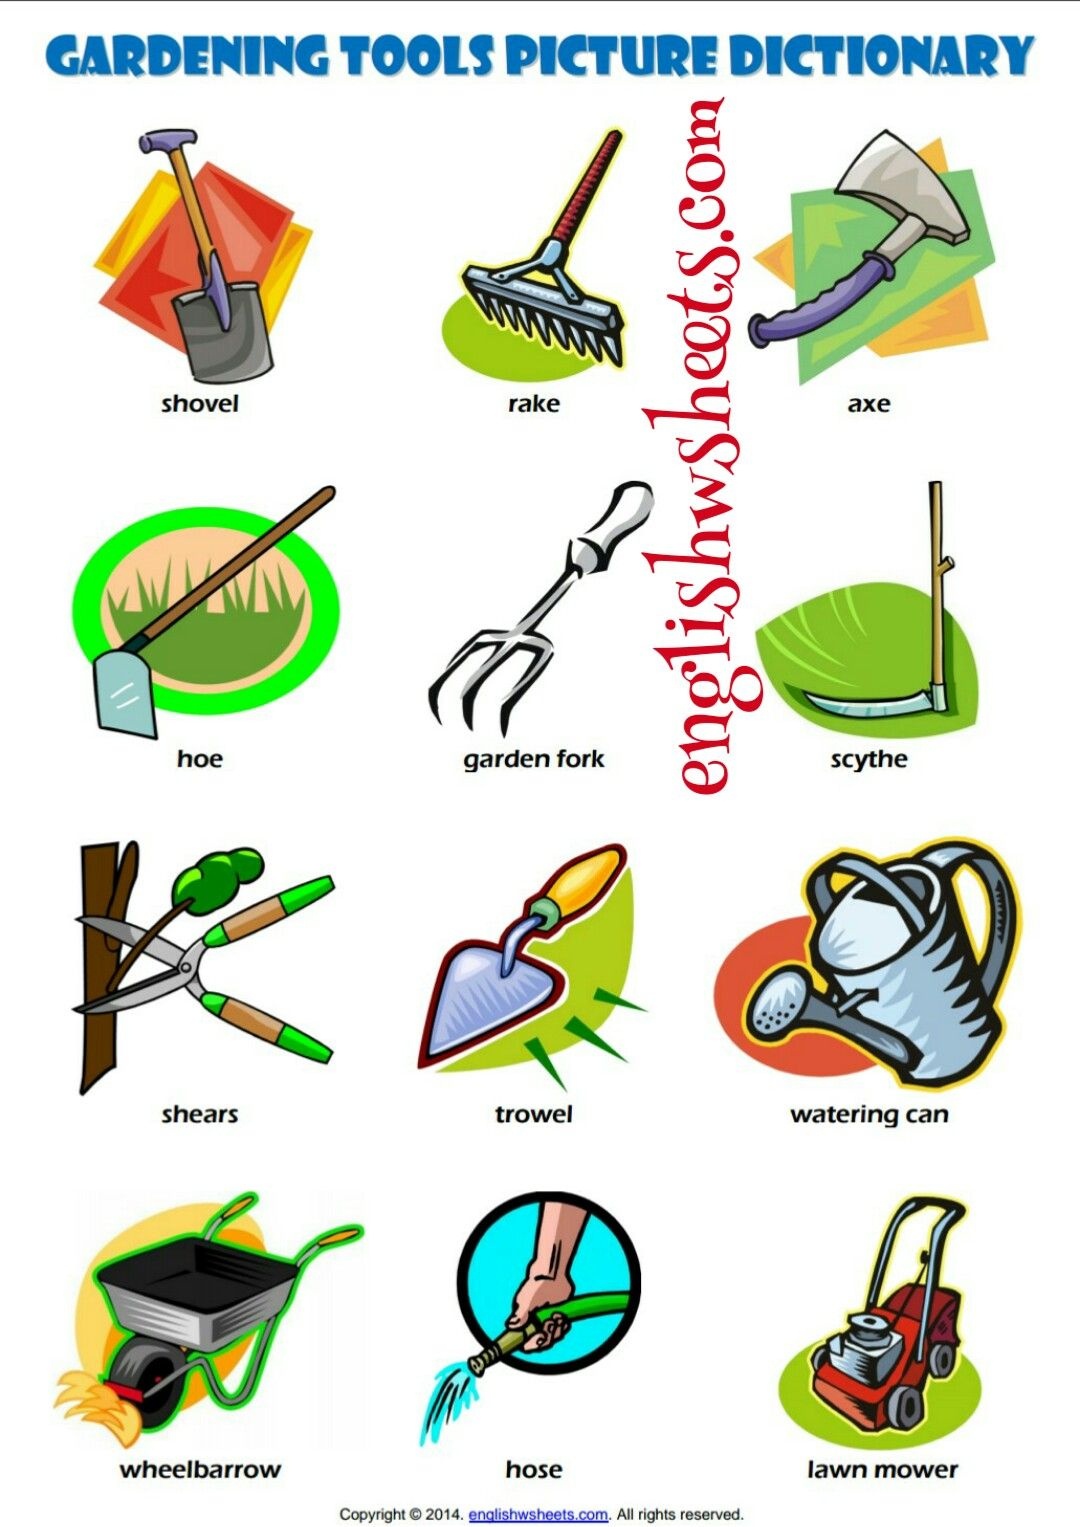 Esl Printable Gardening Tools Vocabulary Worksheets For Kids #esl - Free Printable Picture Dictionary For Kids